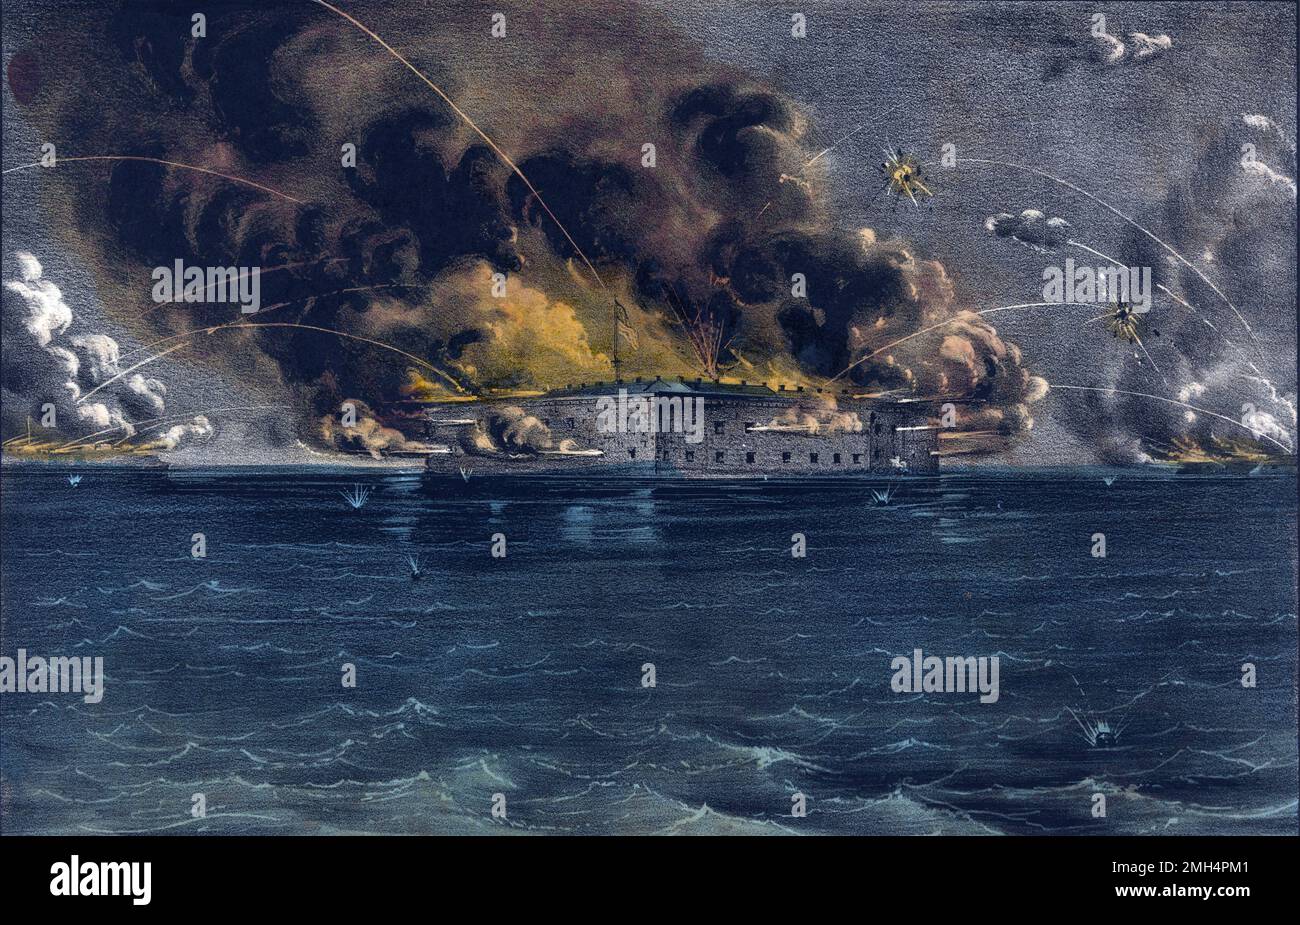 The bombardment of Fort Sumter. The Confederate bombardment and capture of Fort Sumter was the opening battle in the American Ciil War. Stock Photo